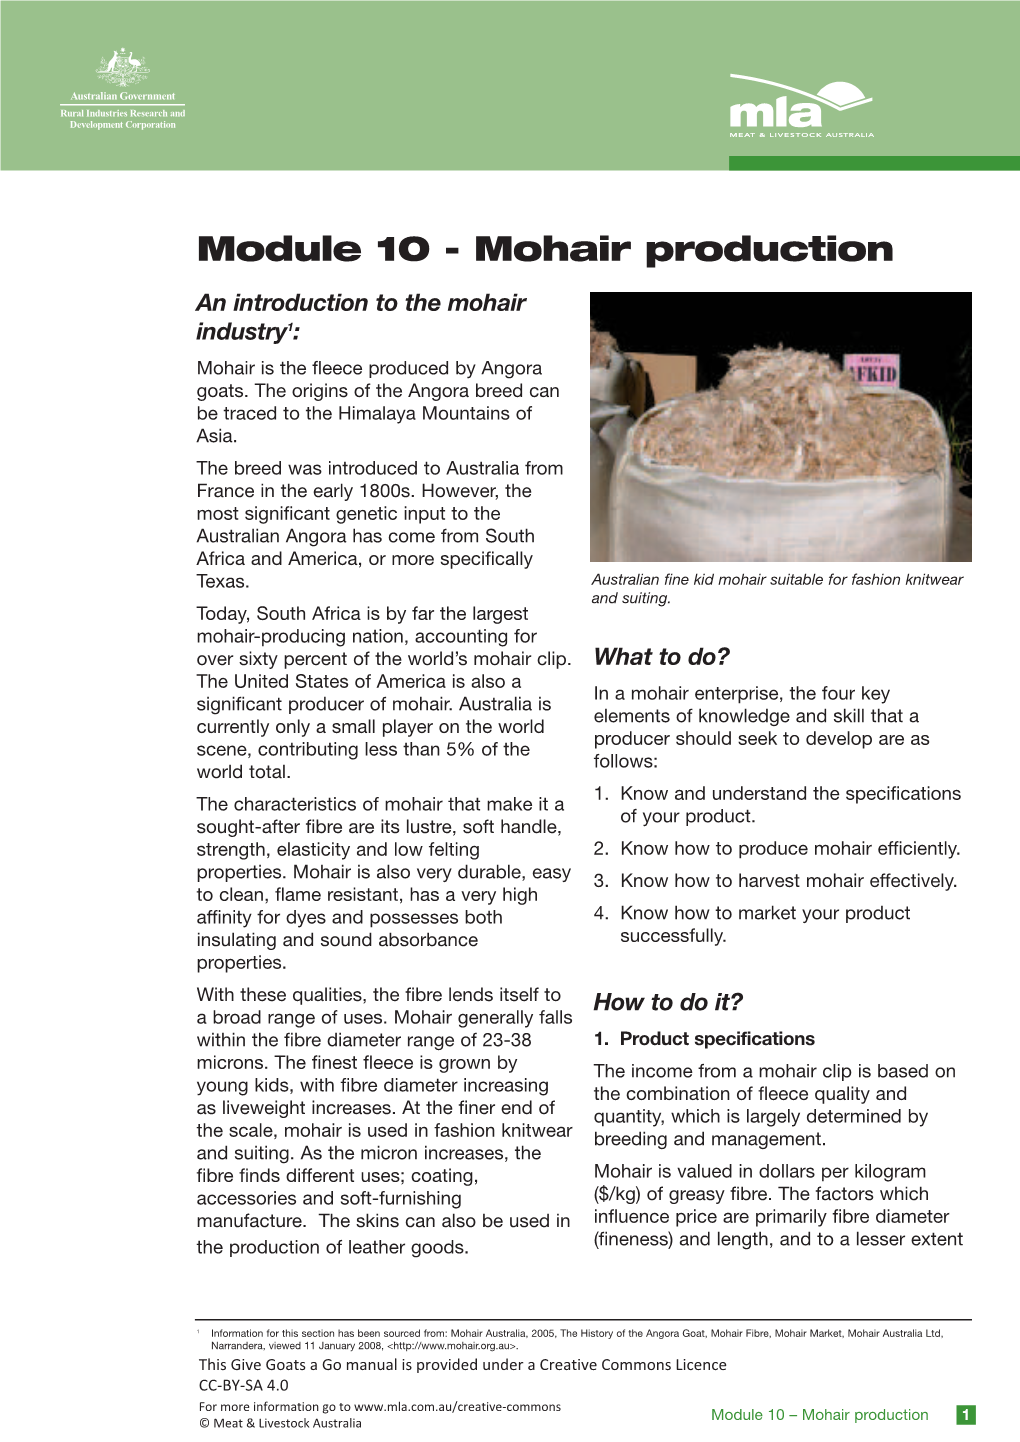 Mohair Production an Introduction to the Mohair Industry1: Mohair Is the Fleece Produced by Angora Goats